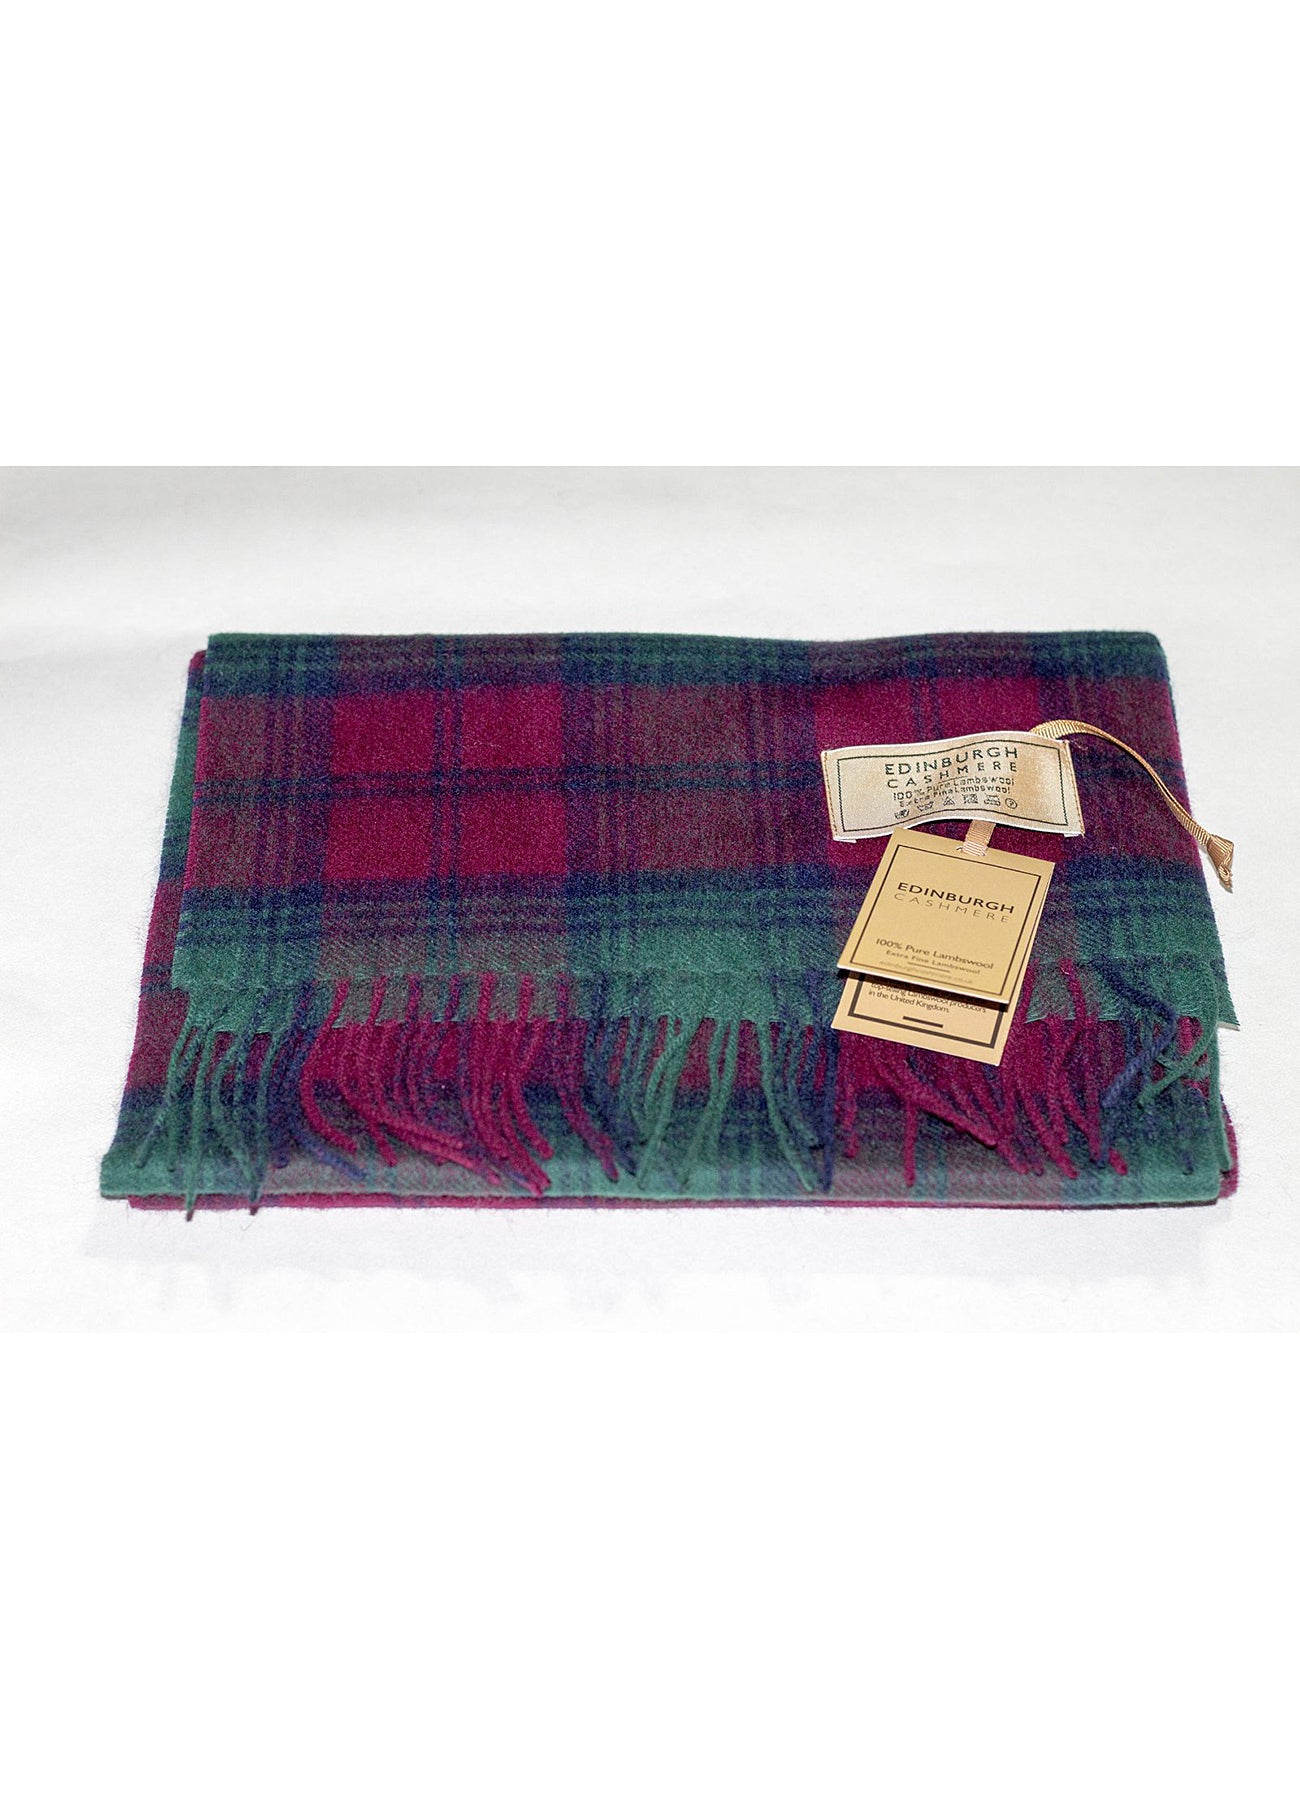 Lindsay - Made in Scotland Scarf 100% Pure Cashmere